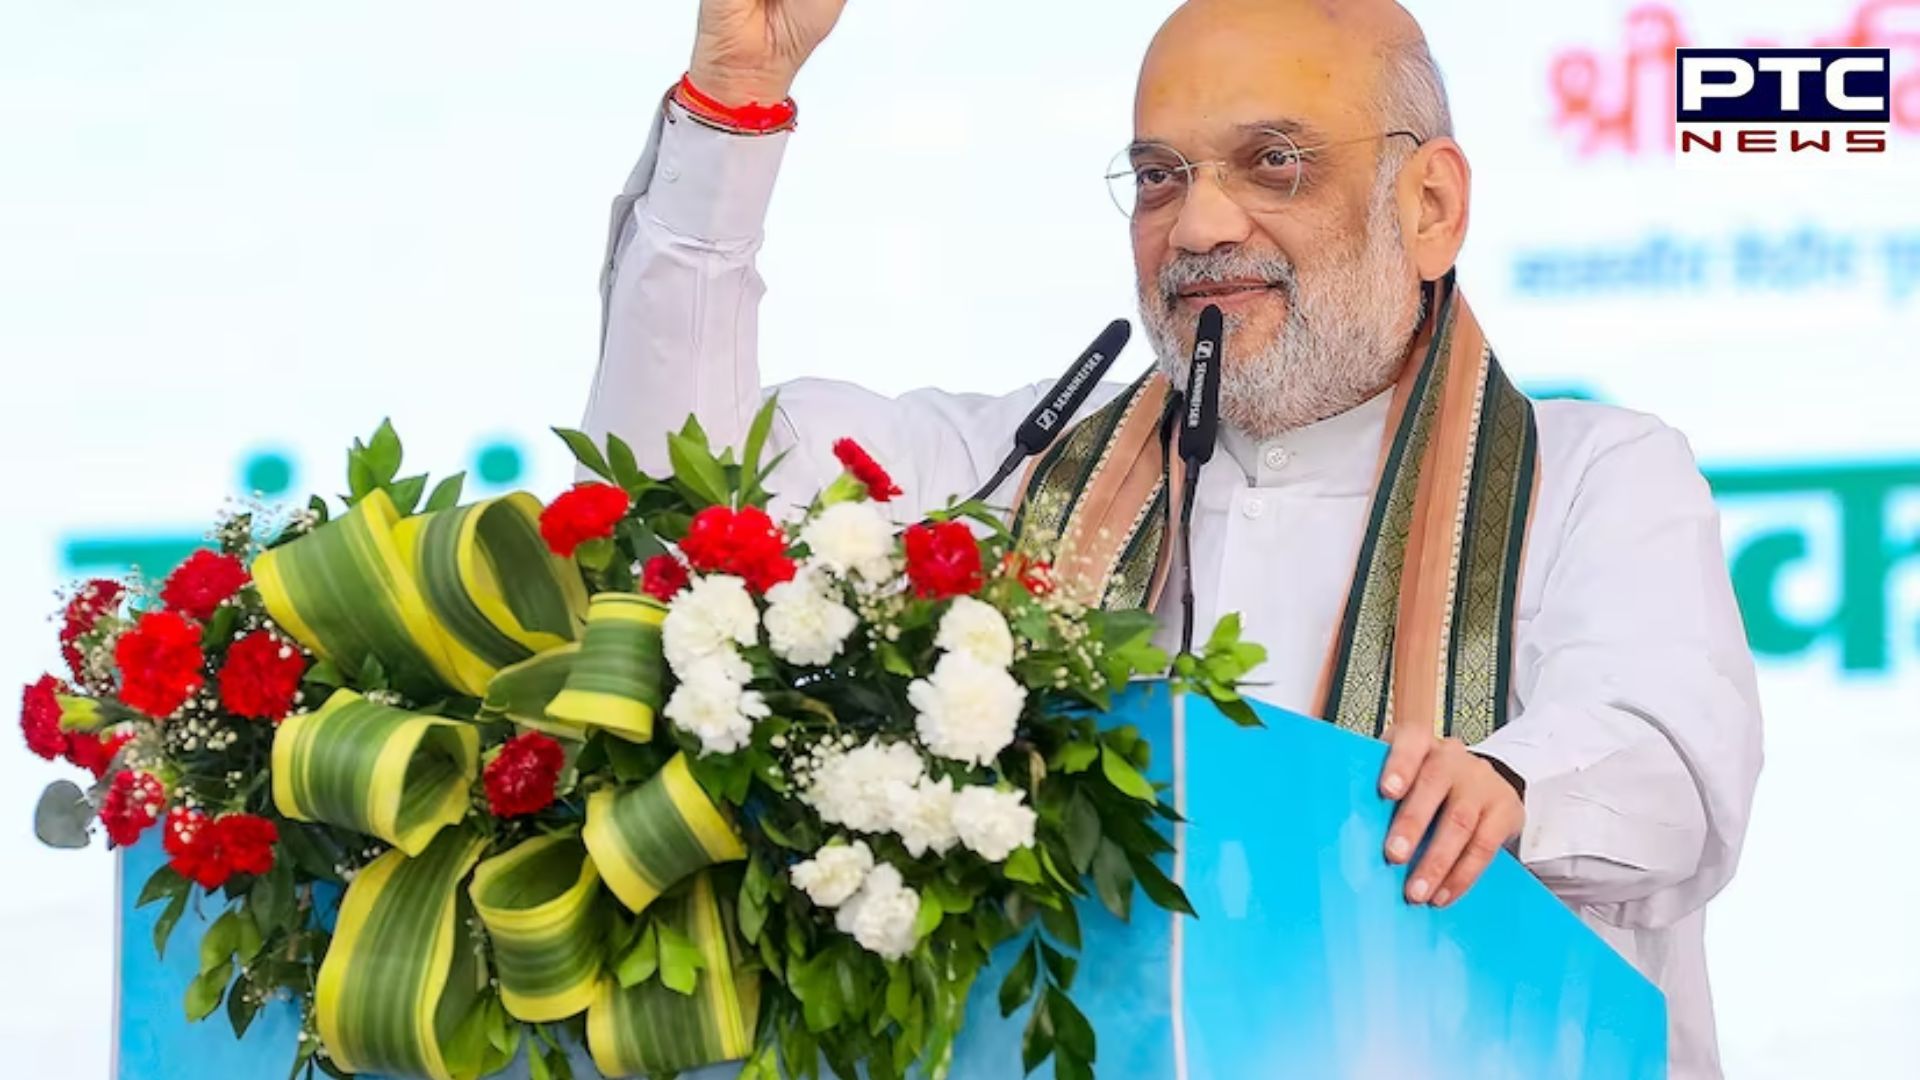 Article 370 Abrogation | ‘Terrorism wiped out, region progressing towards peace’ says Amit Shah